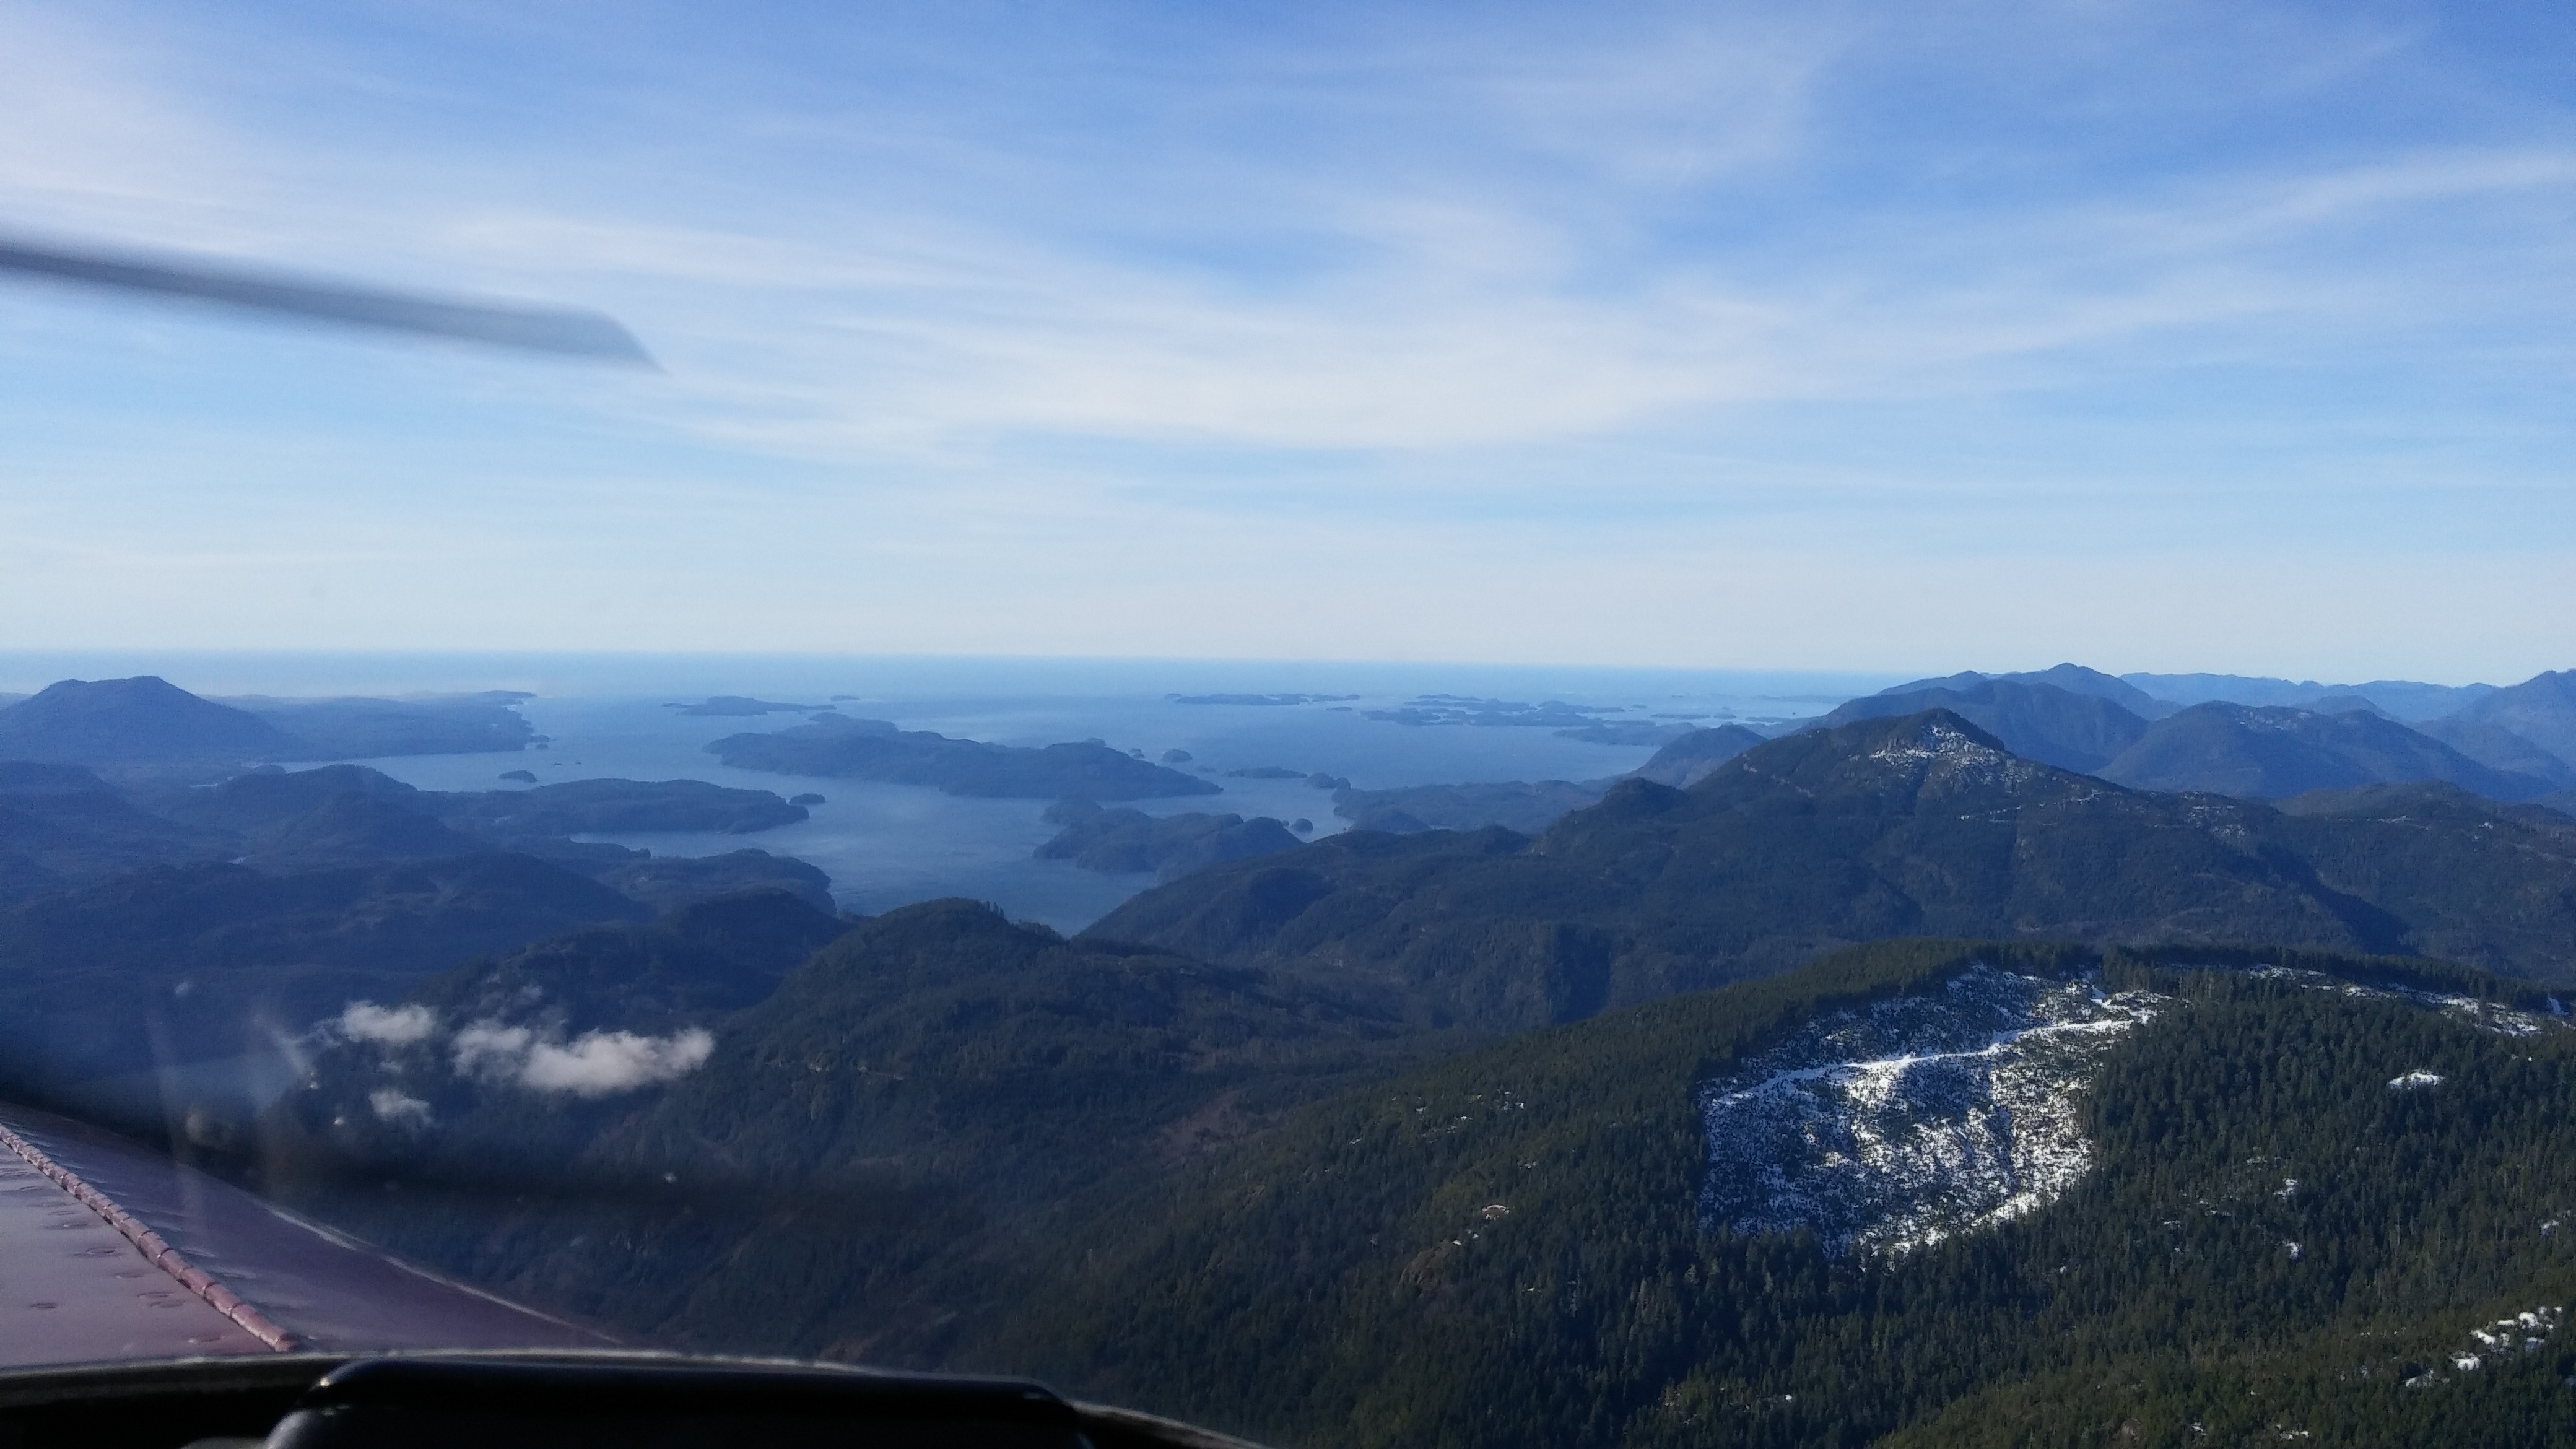 Exiting the Alberni Inlet, with Pacific Rim National Park visible in the distance